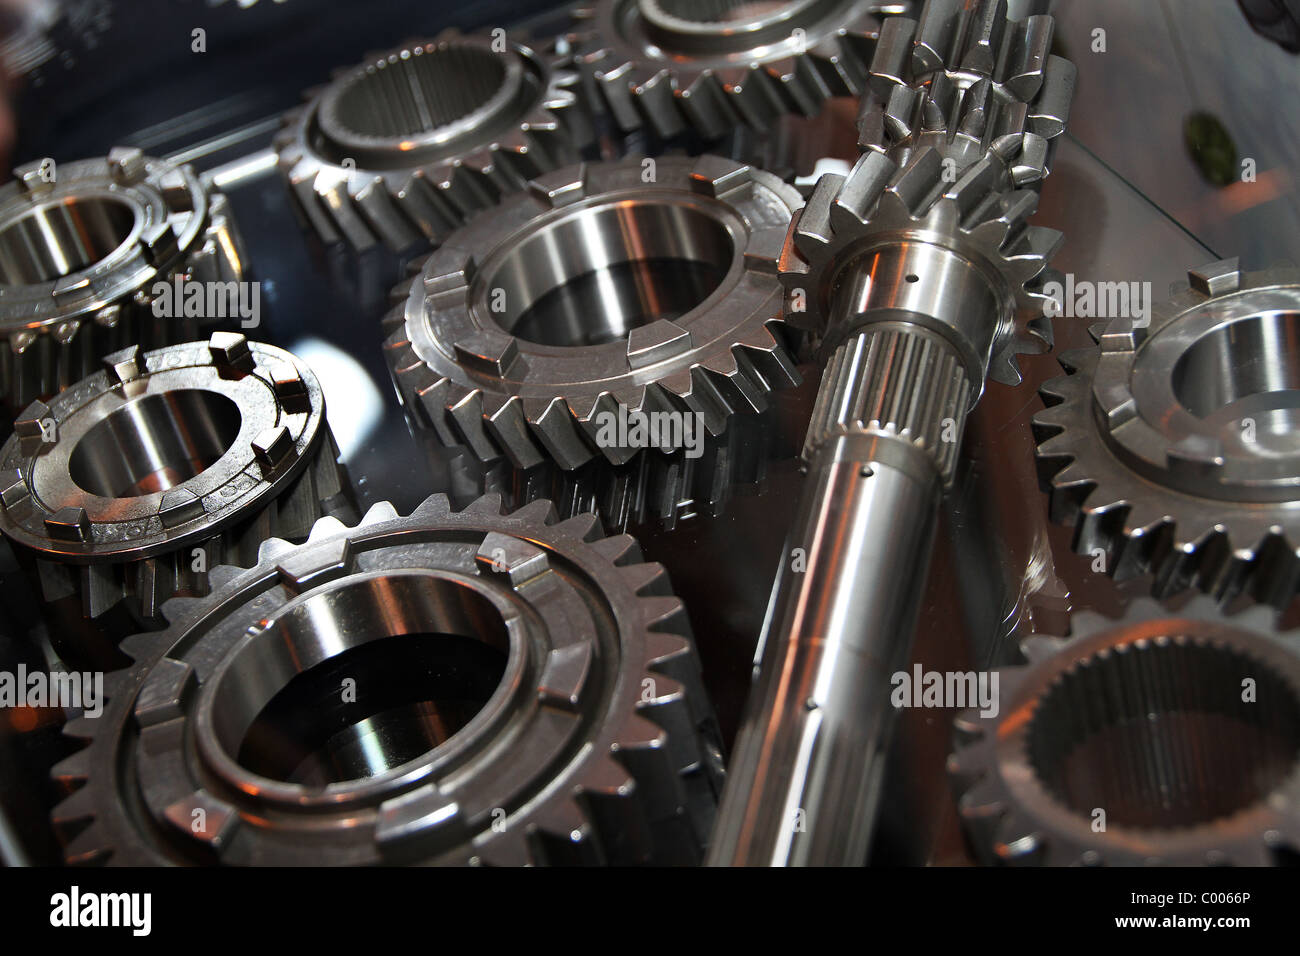 New steel gears in display cabinet. Stock Photo